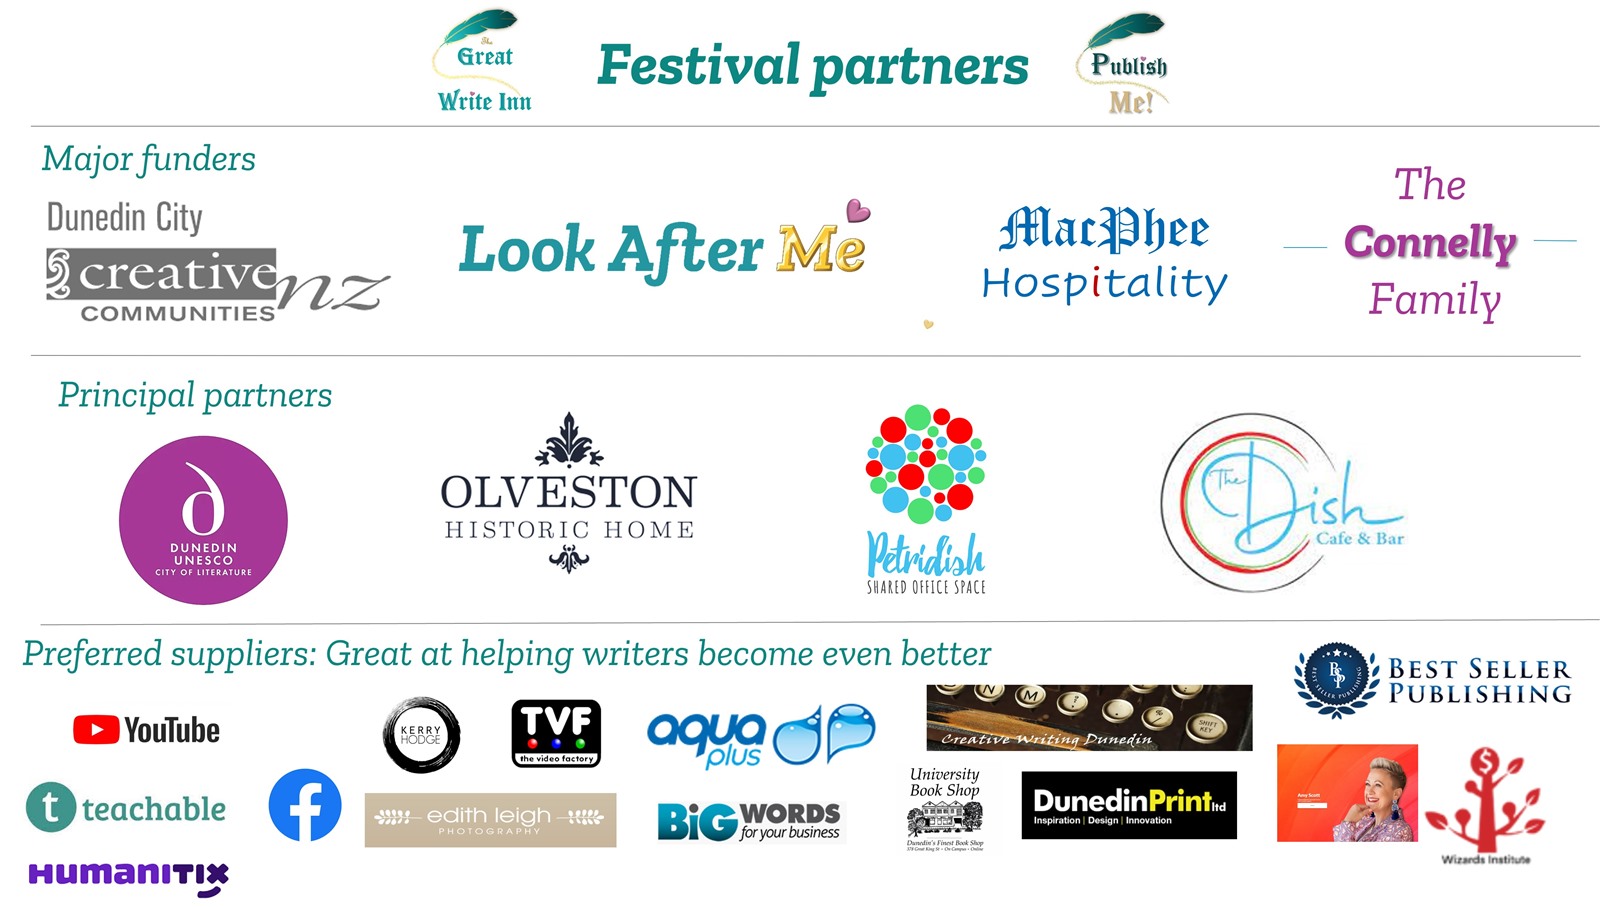 Sponsors and suppliers for The Great Write Inn